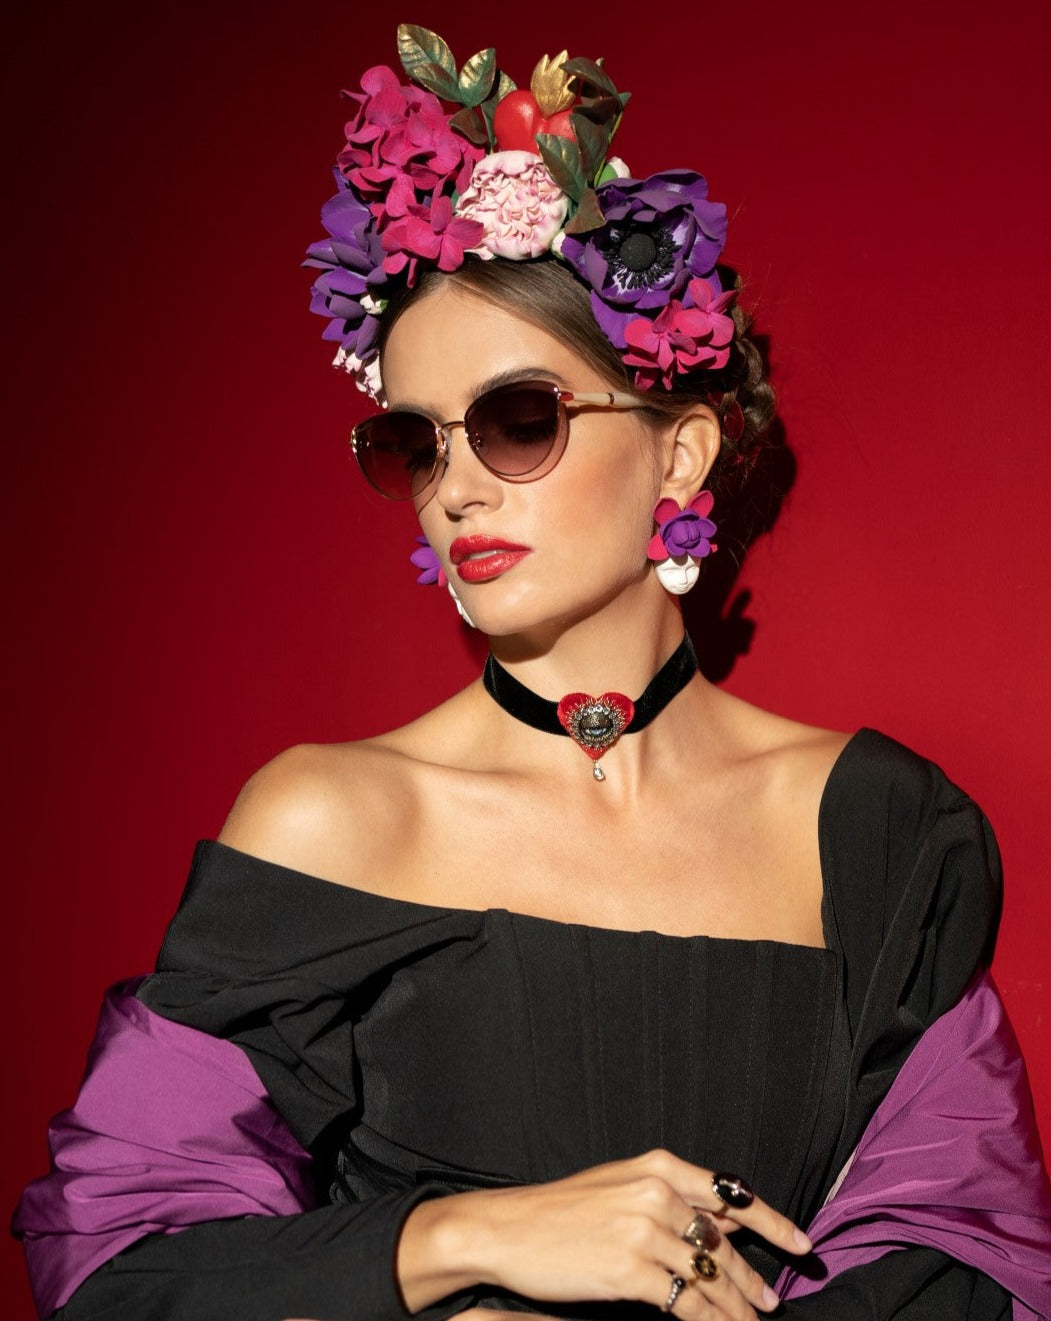 A woman with floral headwear and ultra-lightweight Frida Brush sunglasses by For Art&#39;s Sake® poses against a red background. She wears a black off-the-shoulder dress with purple sleeves, a black choker with a red heart pendant, and bold red lipstick. Her gold-plated earrings and hairstyle complement the vibrant flowers.